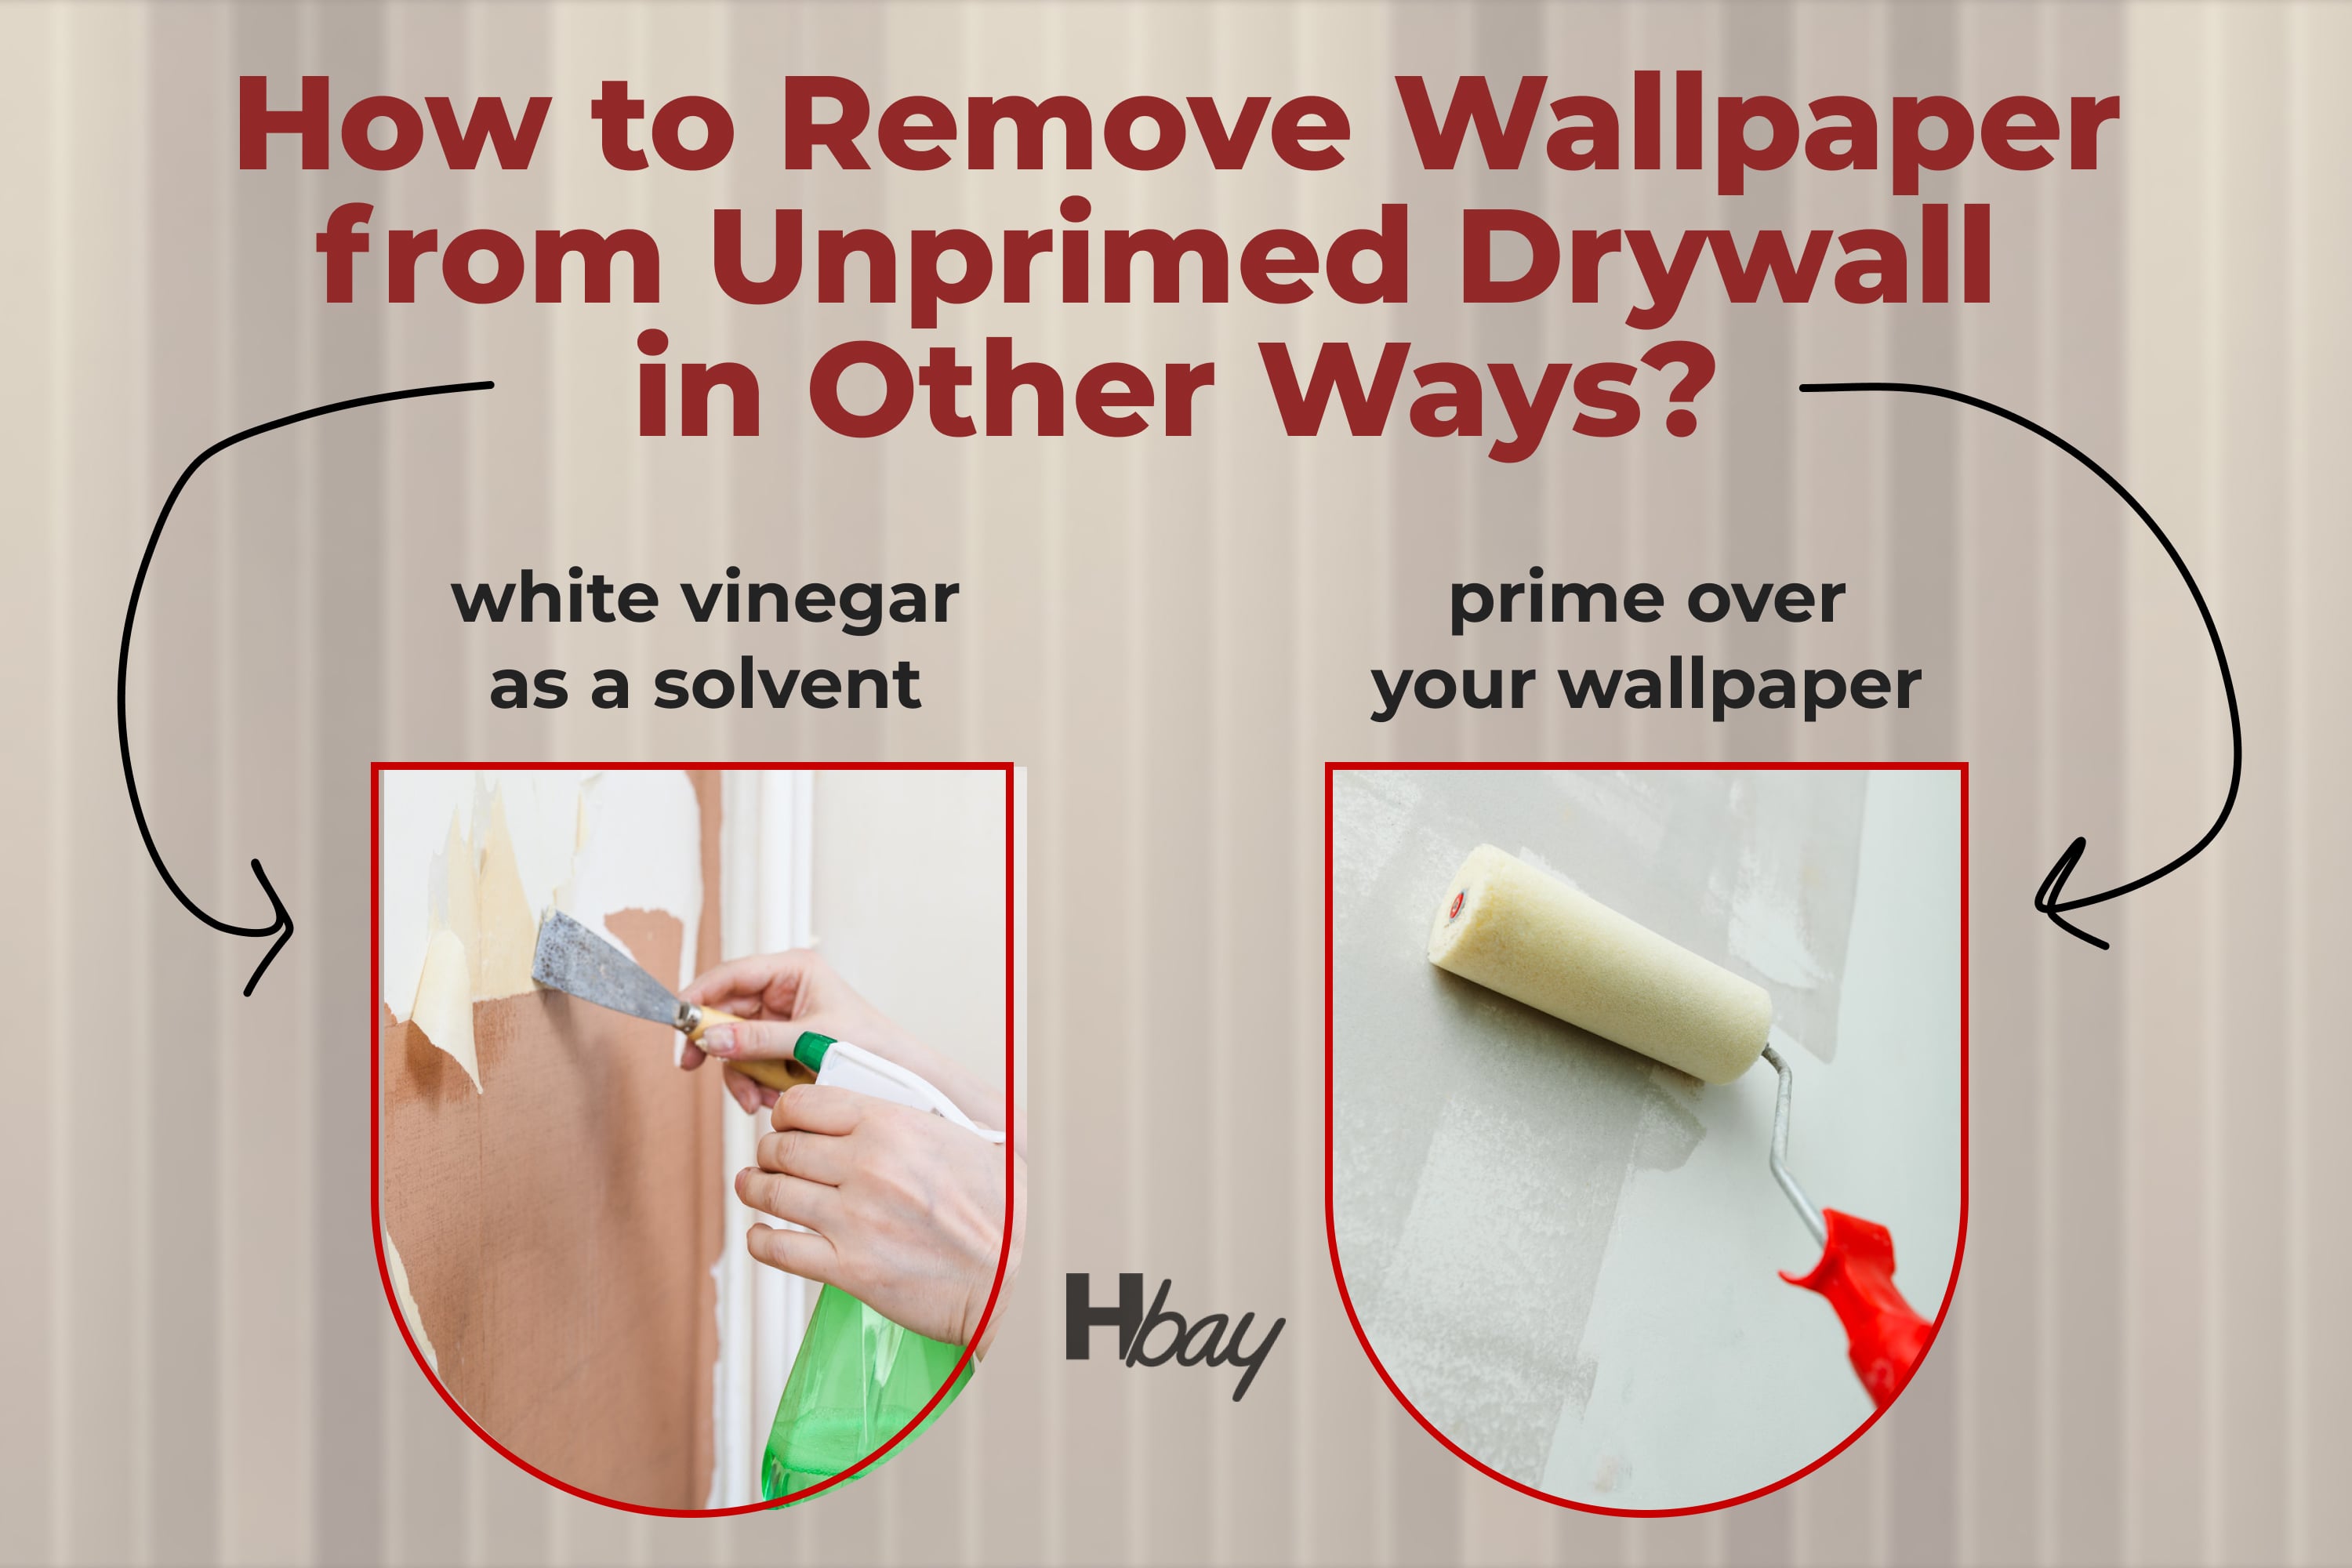 How to remove wallpaper from unprimed drywall in other ways